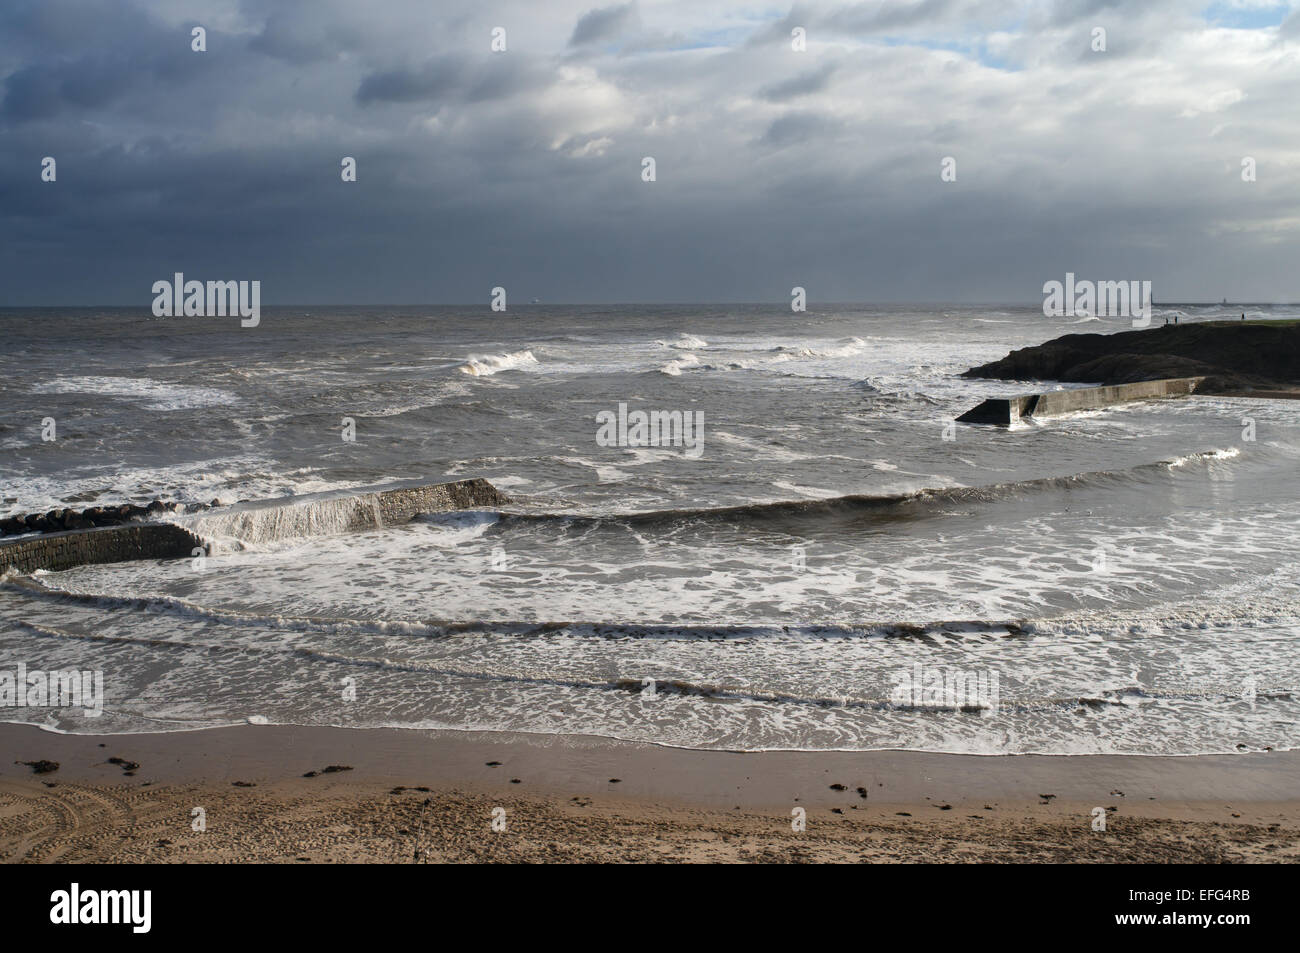 Waves washing over breakwater during stormy conditions, Cullercoats Bay with Tynemouth in background north east England, UK Stock Photo